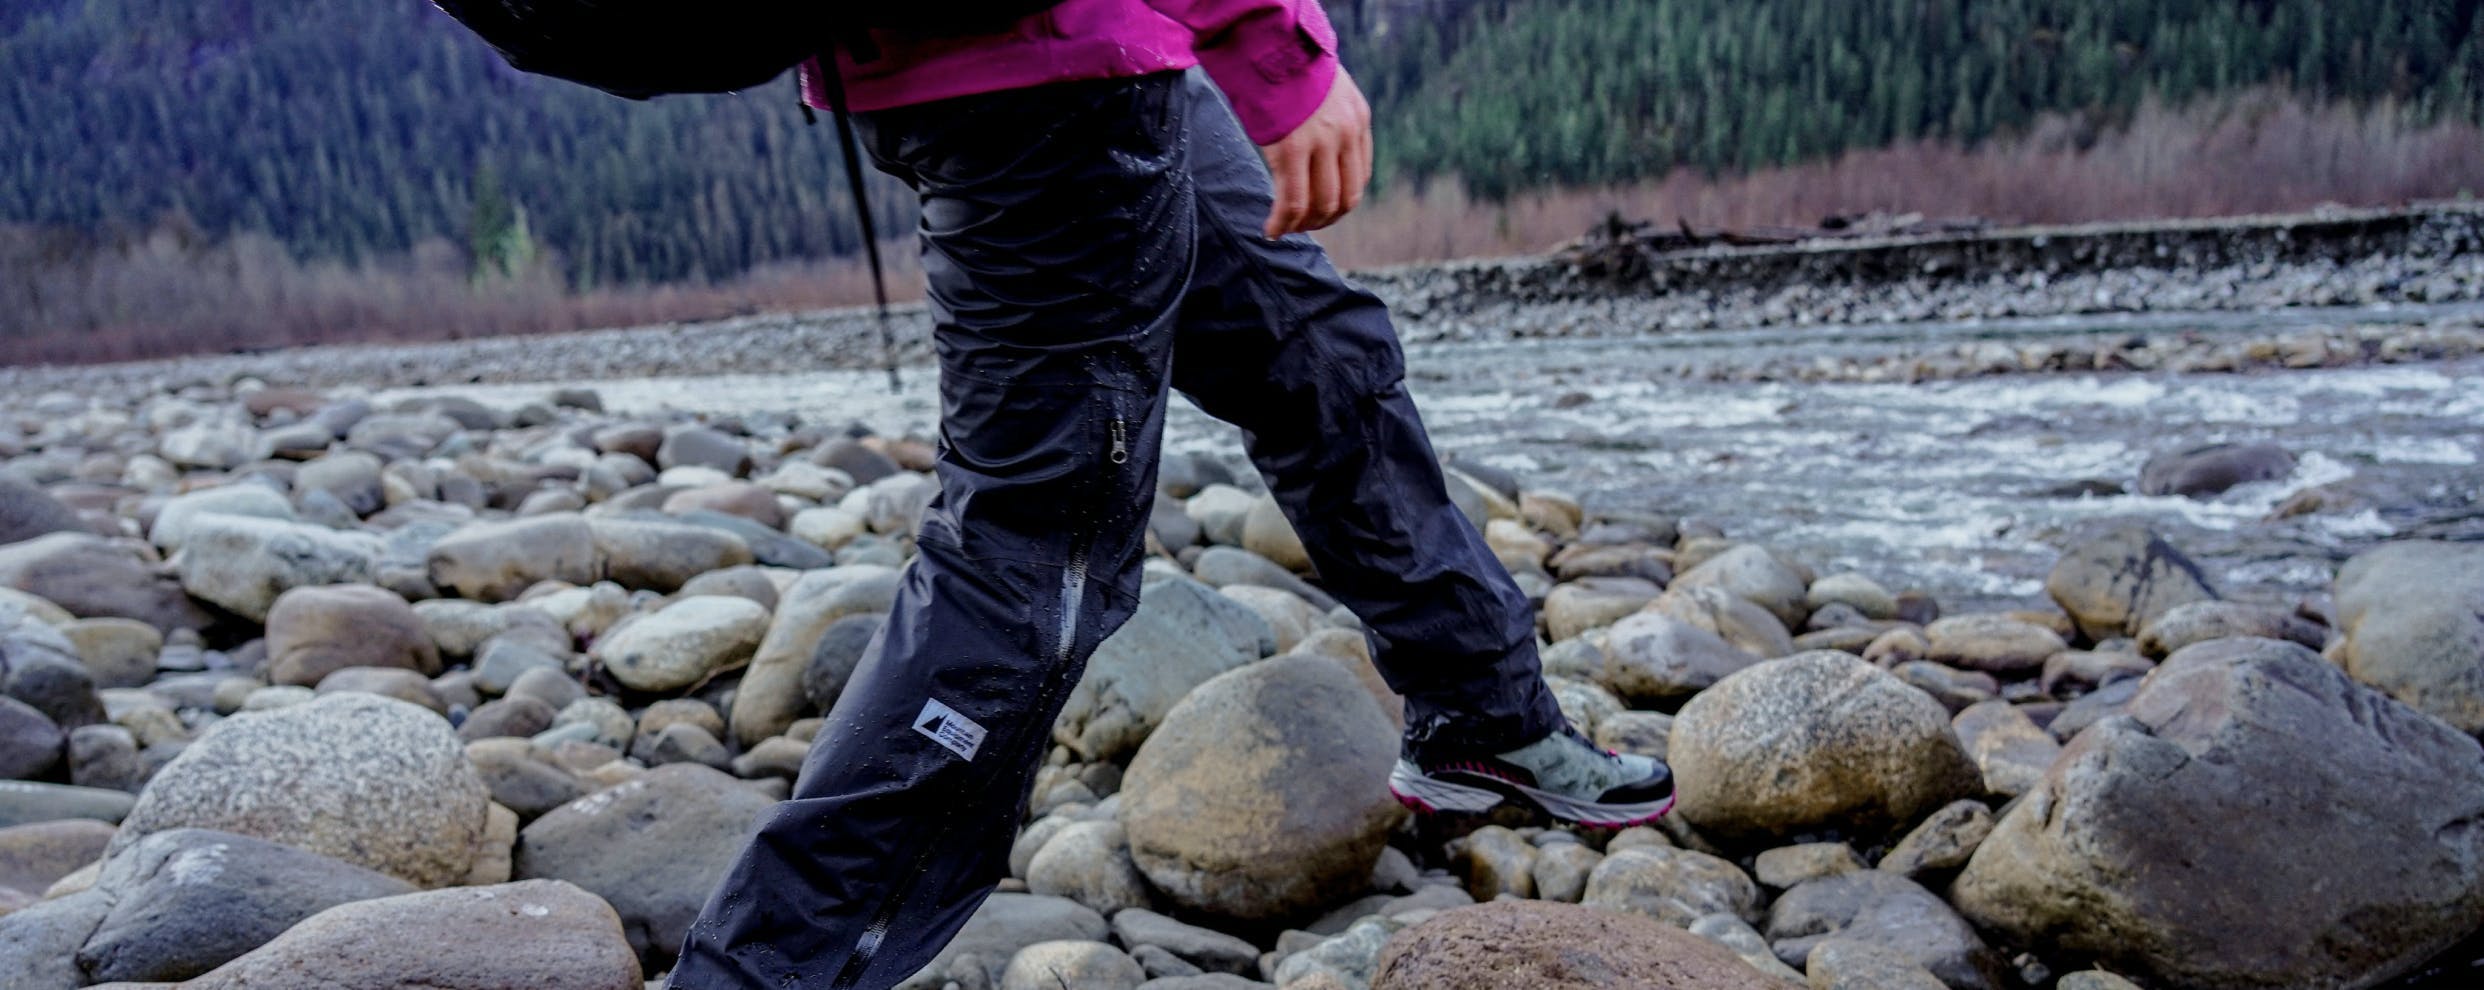 Waterproof-breathability, durability and zip-offs: they’re all here for your next ramble outside.